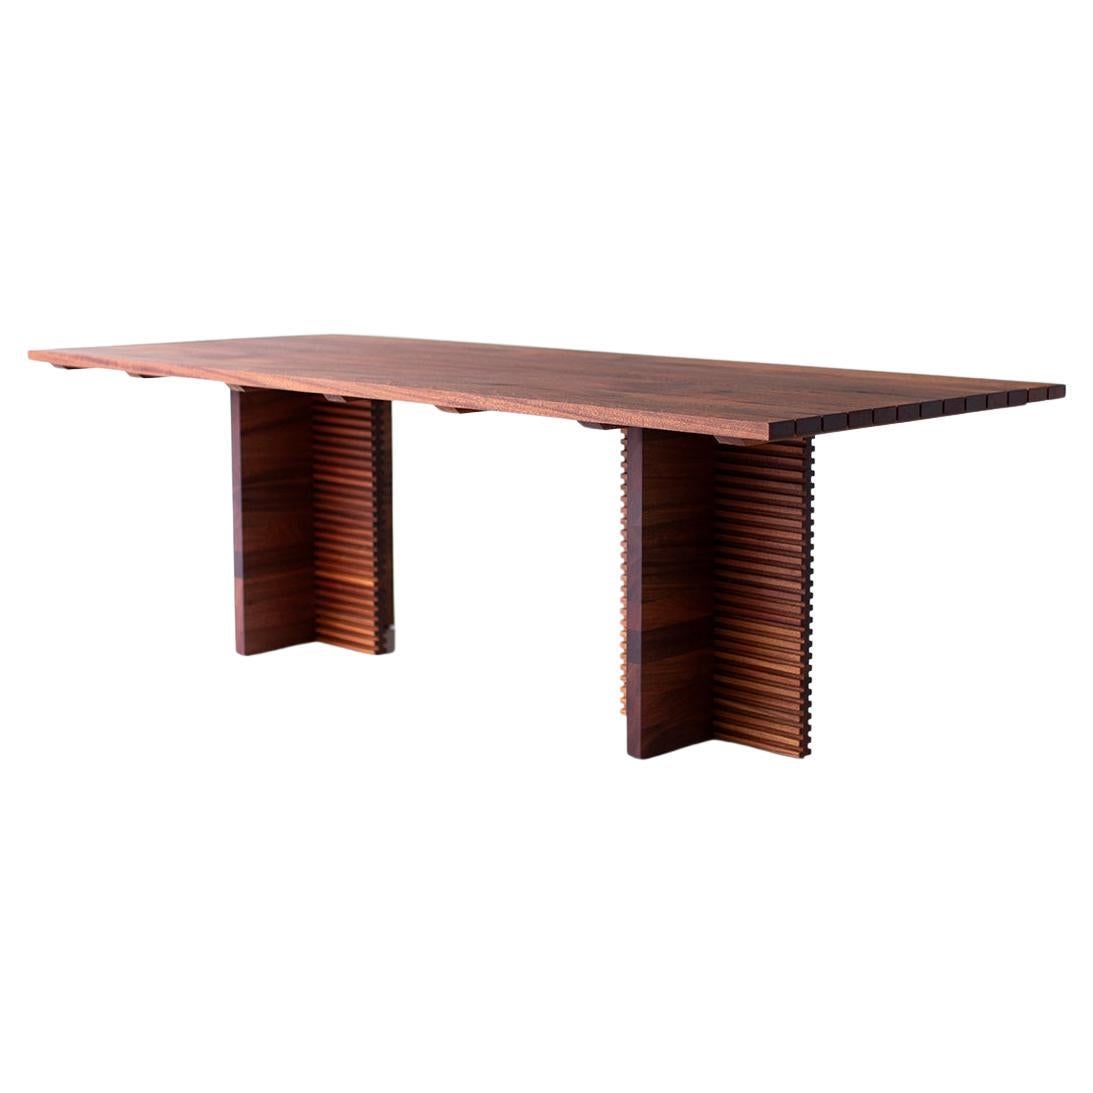 Bertu Outdoor Table, Cicely Outdoor Dining Table, Wood, Mahogany